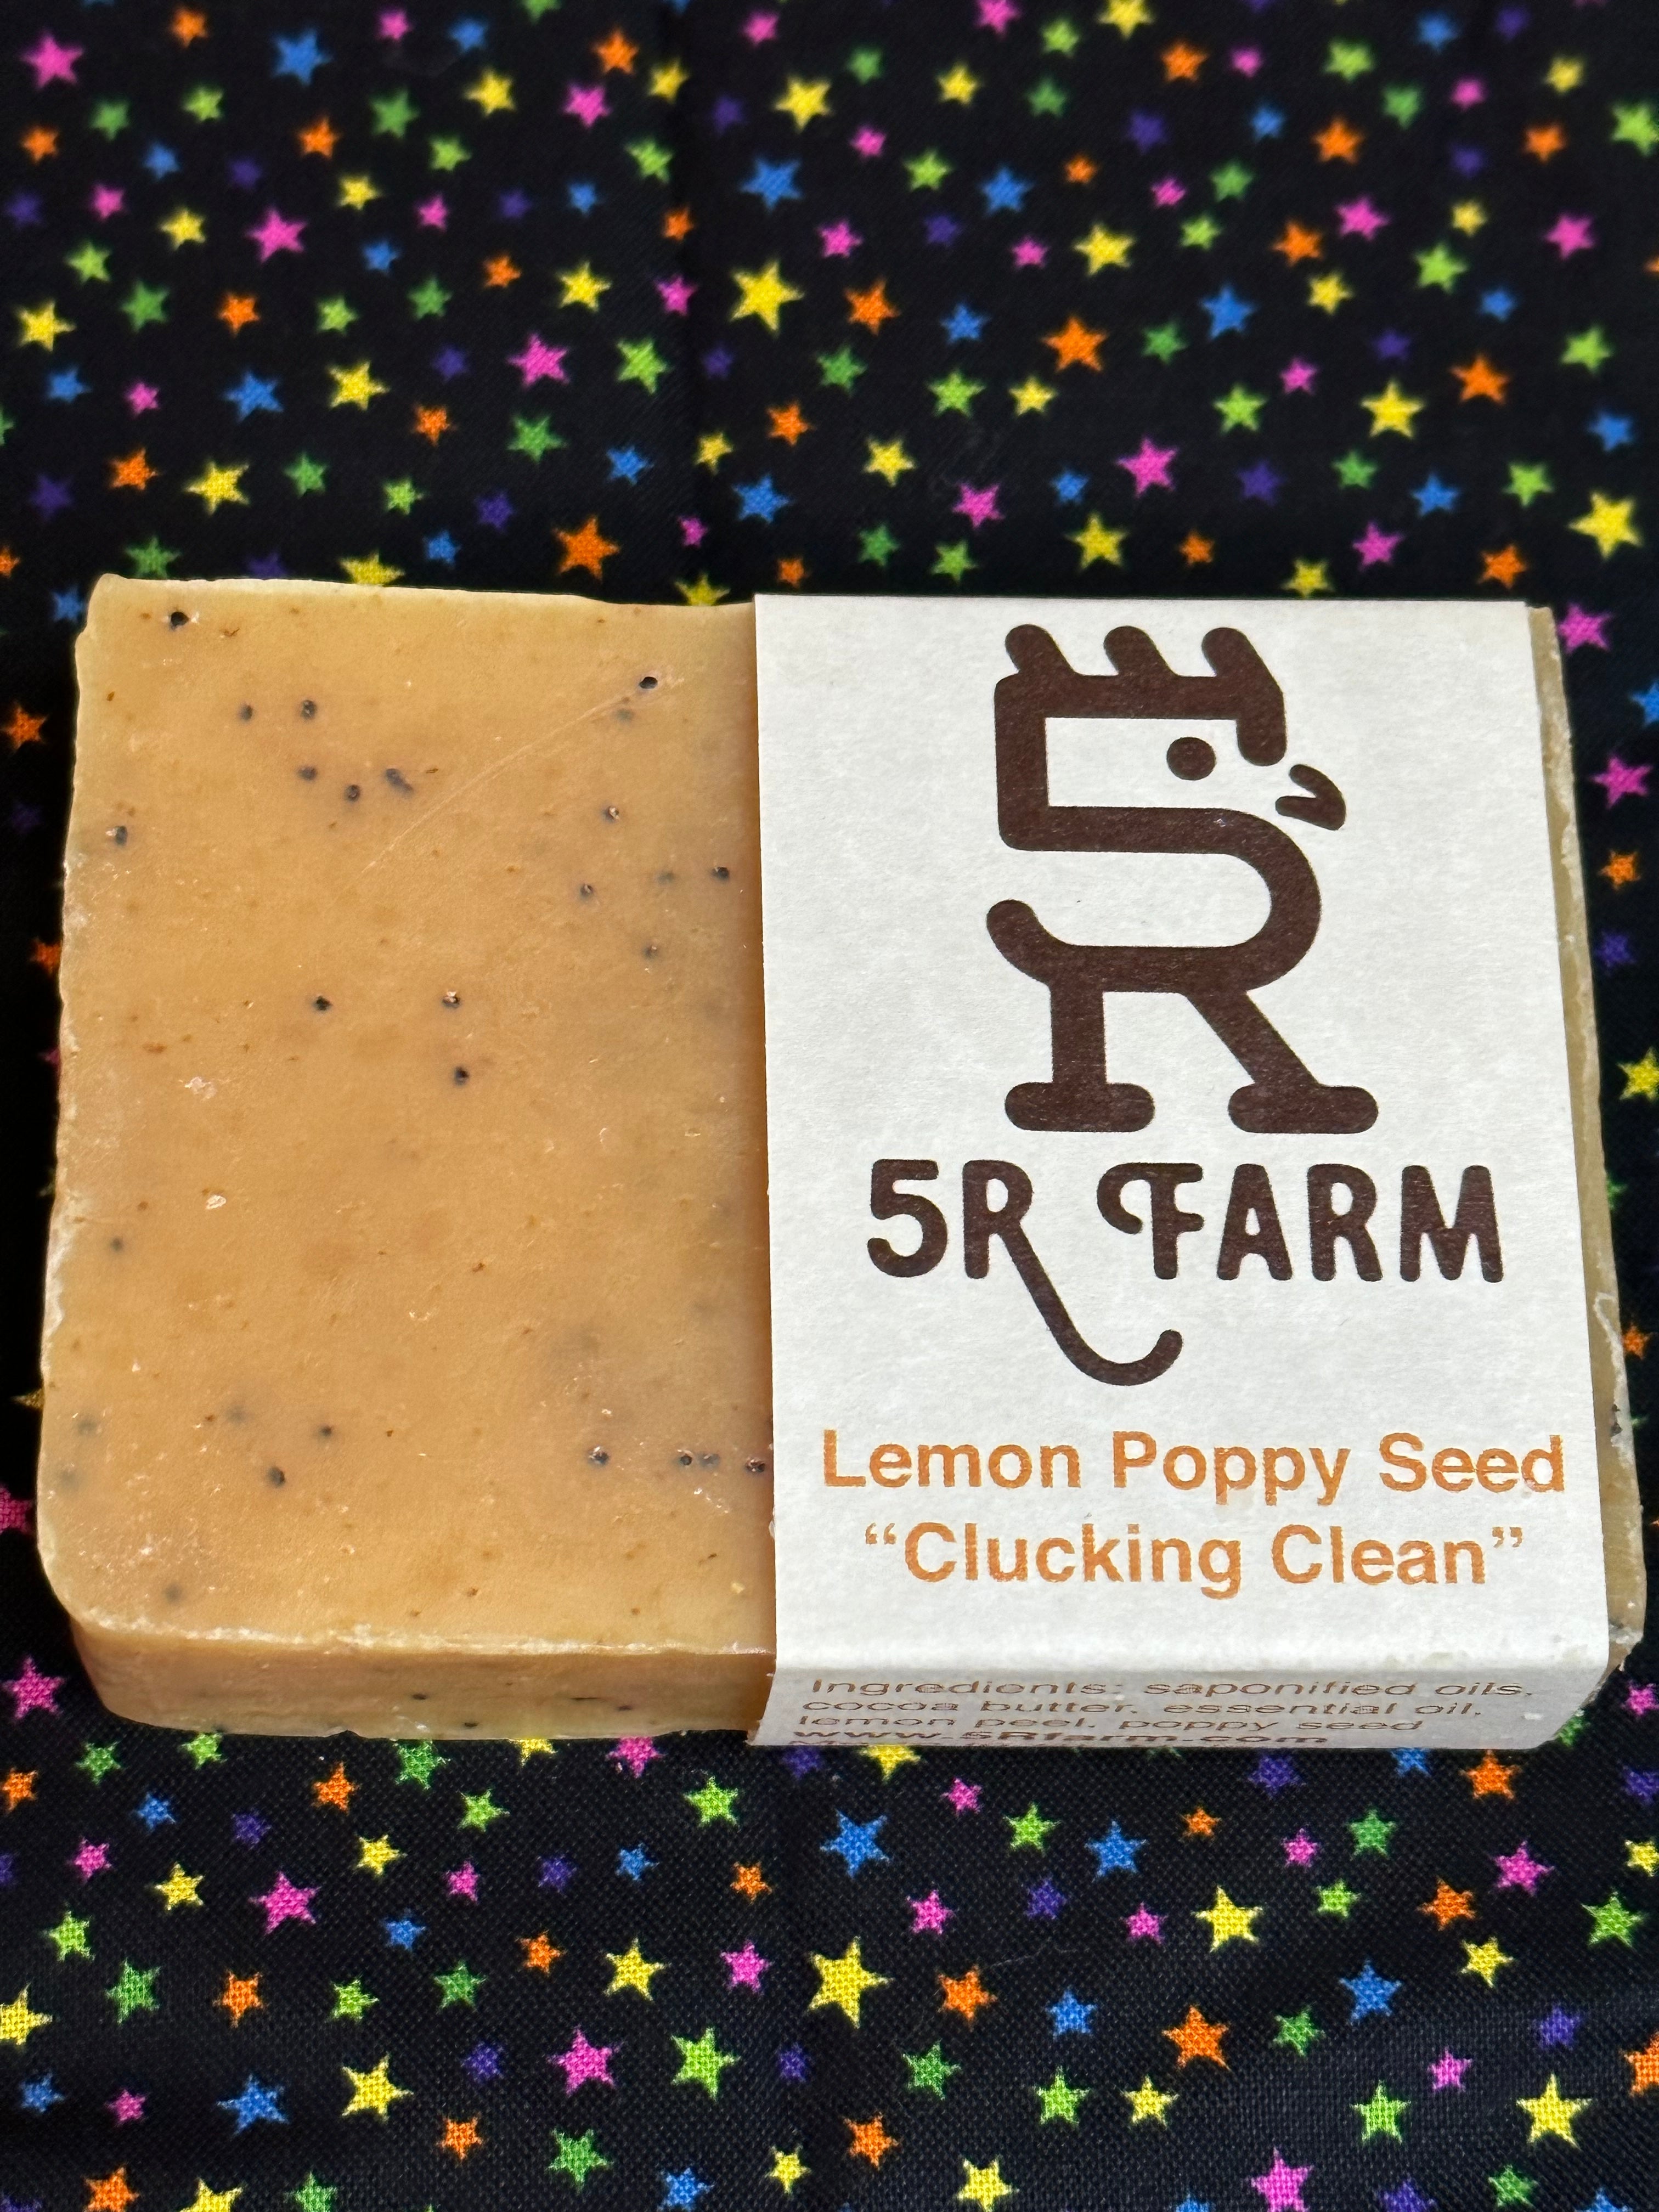 Clucking Clean Handcrafted Soap - 5R Farm